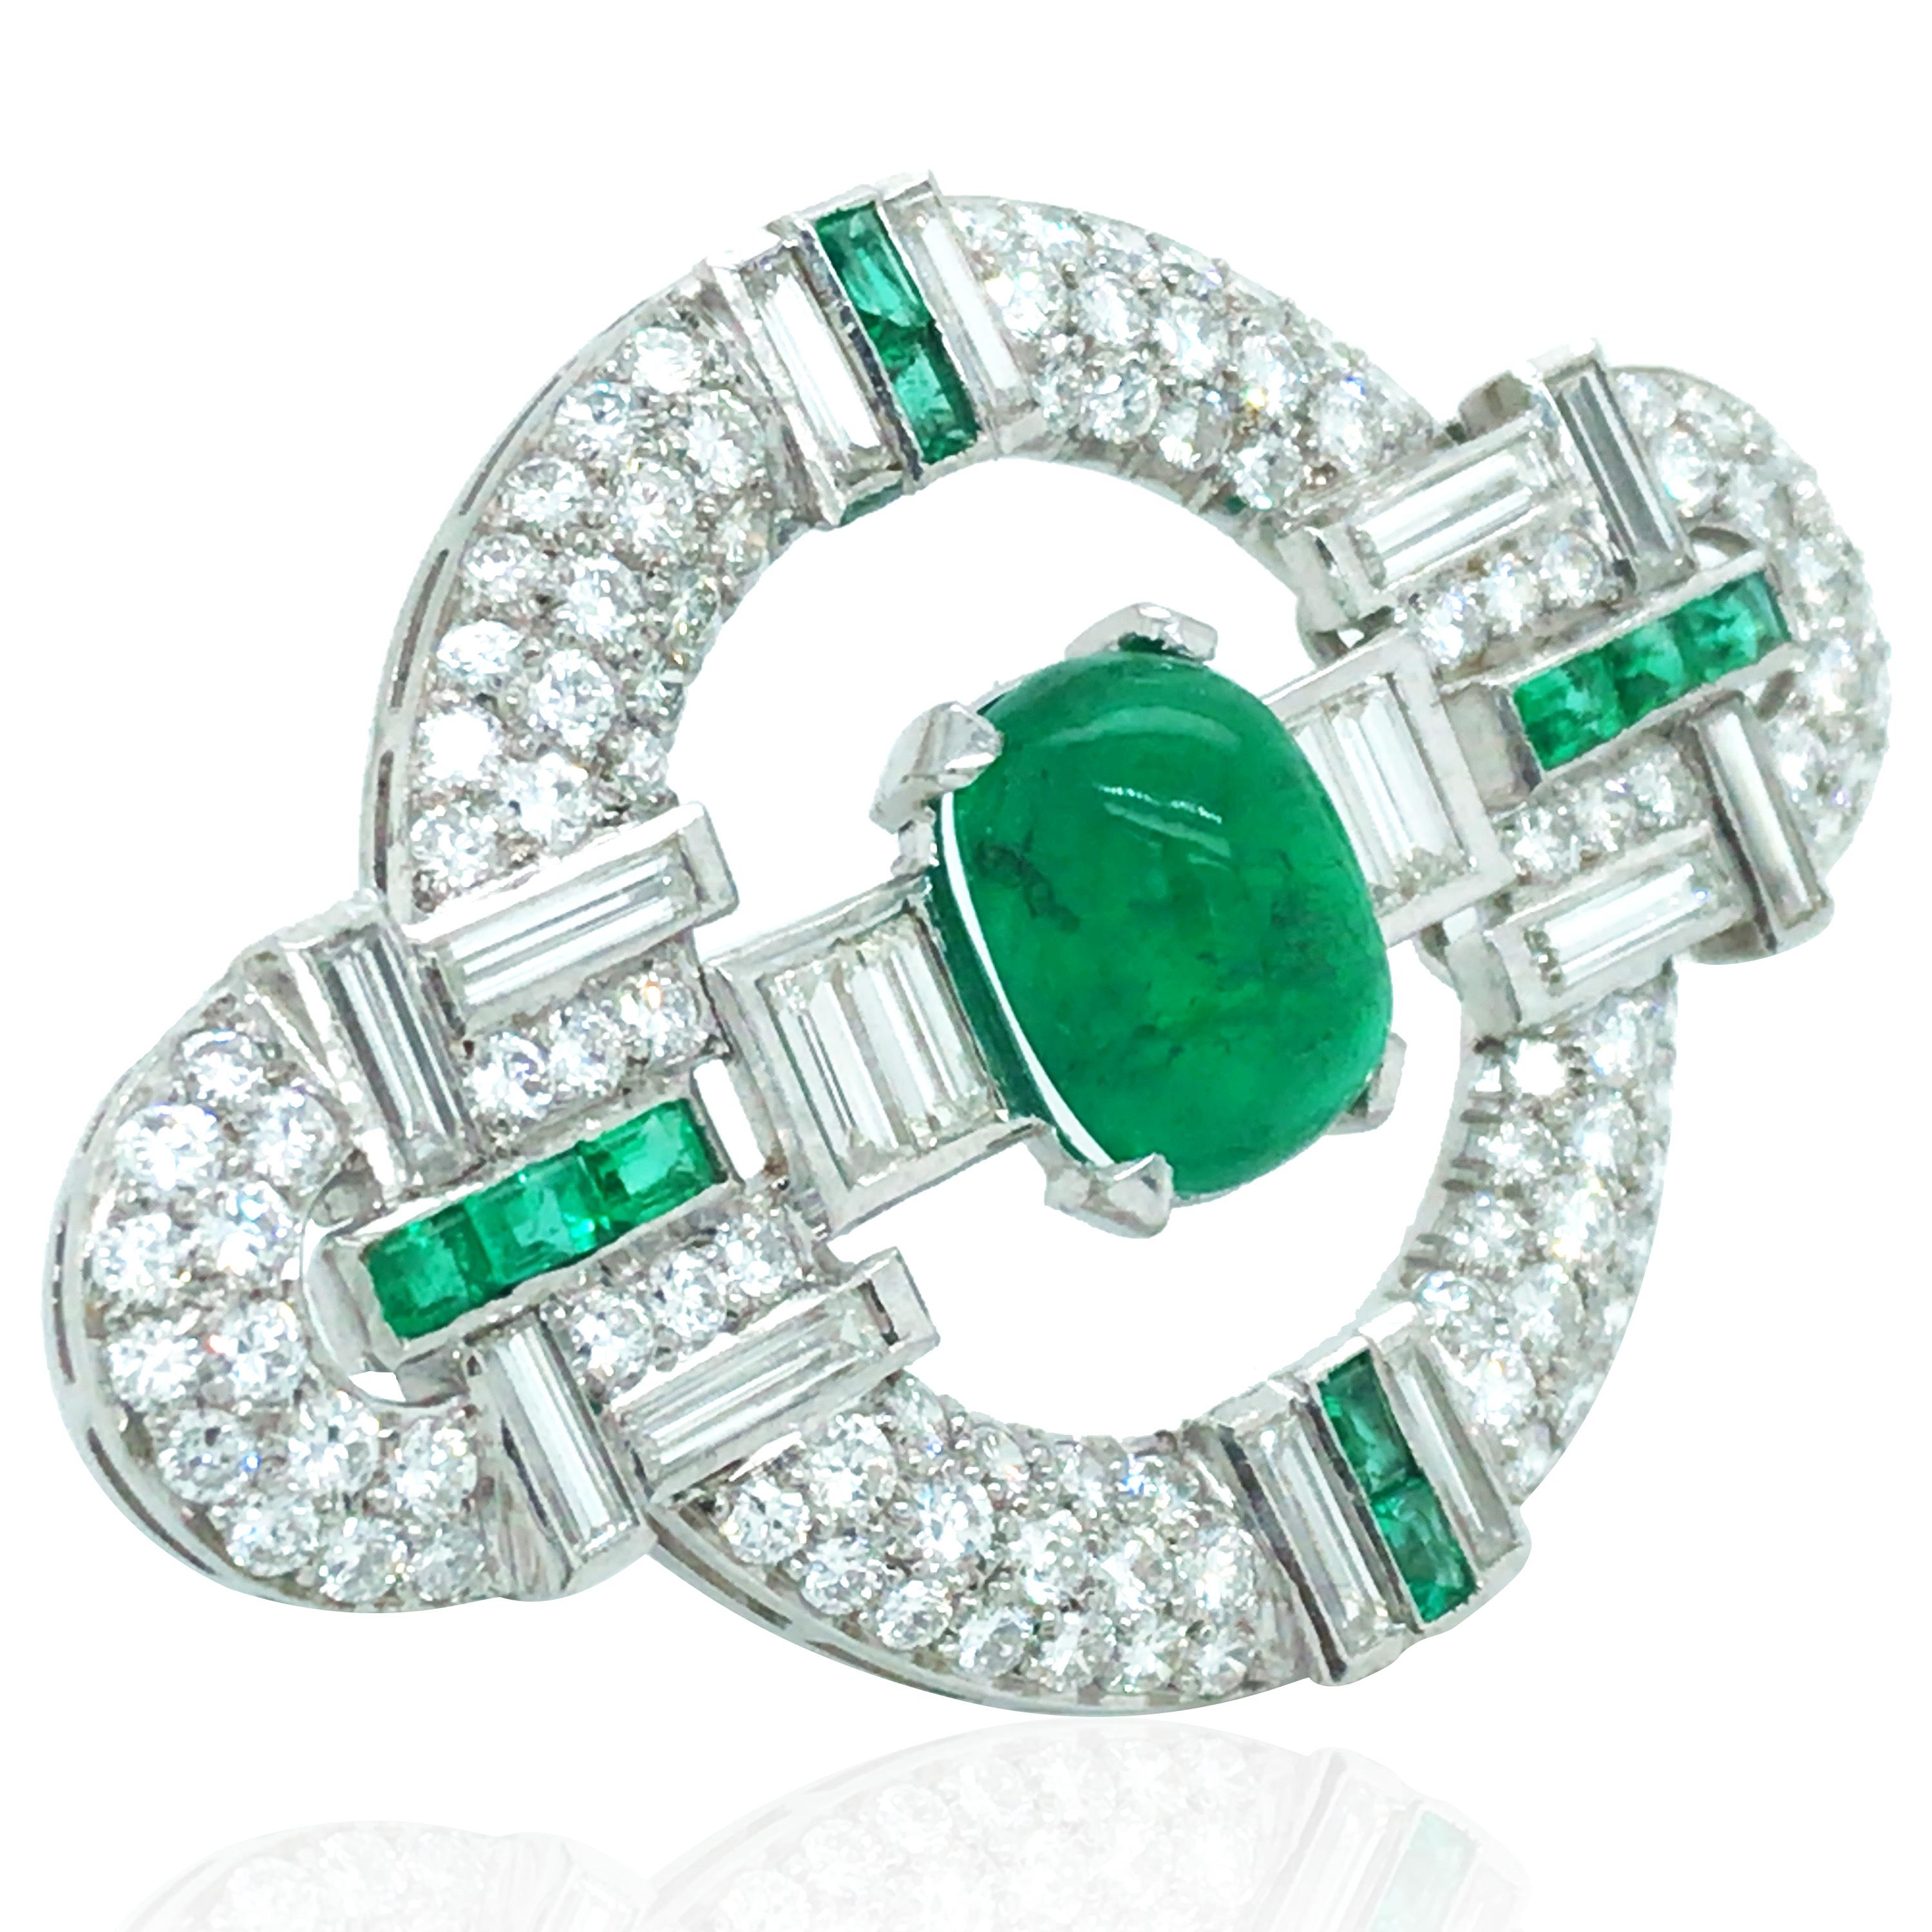 This emerald diamond brooch consists of 1 cabochon-cut and 10 baguette-cut emeralds, 16 baguette-cut and 102 round-cut diamonds. The cabochon-cut emerald is approx. 4.6ct. Emerald approx. 5.3ct in total and diamond approx. 5.1ct in total.

Emerald: